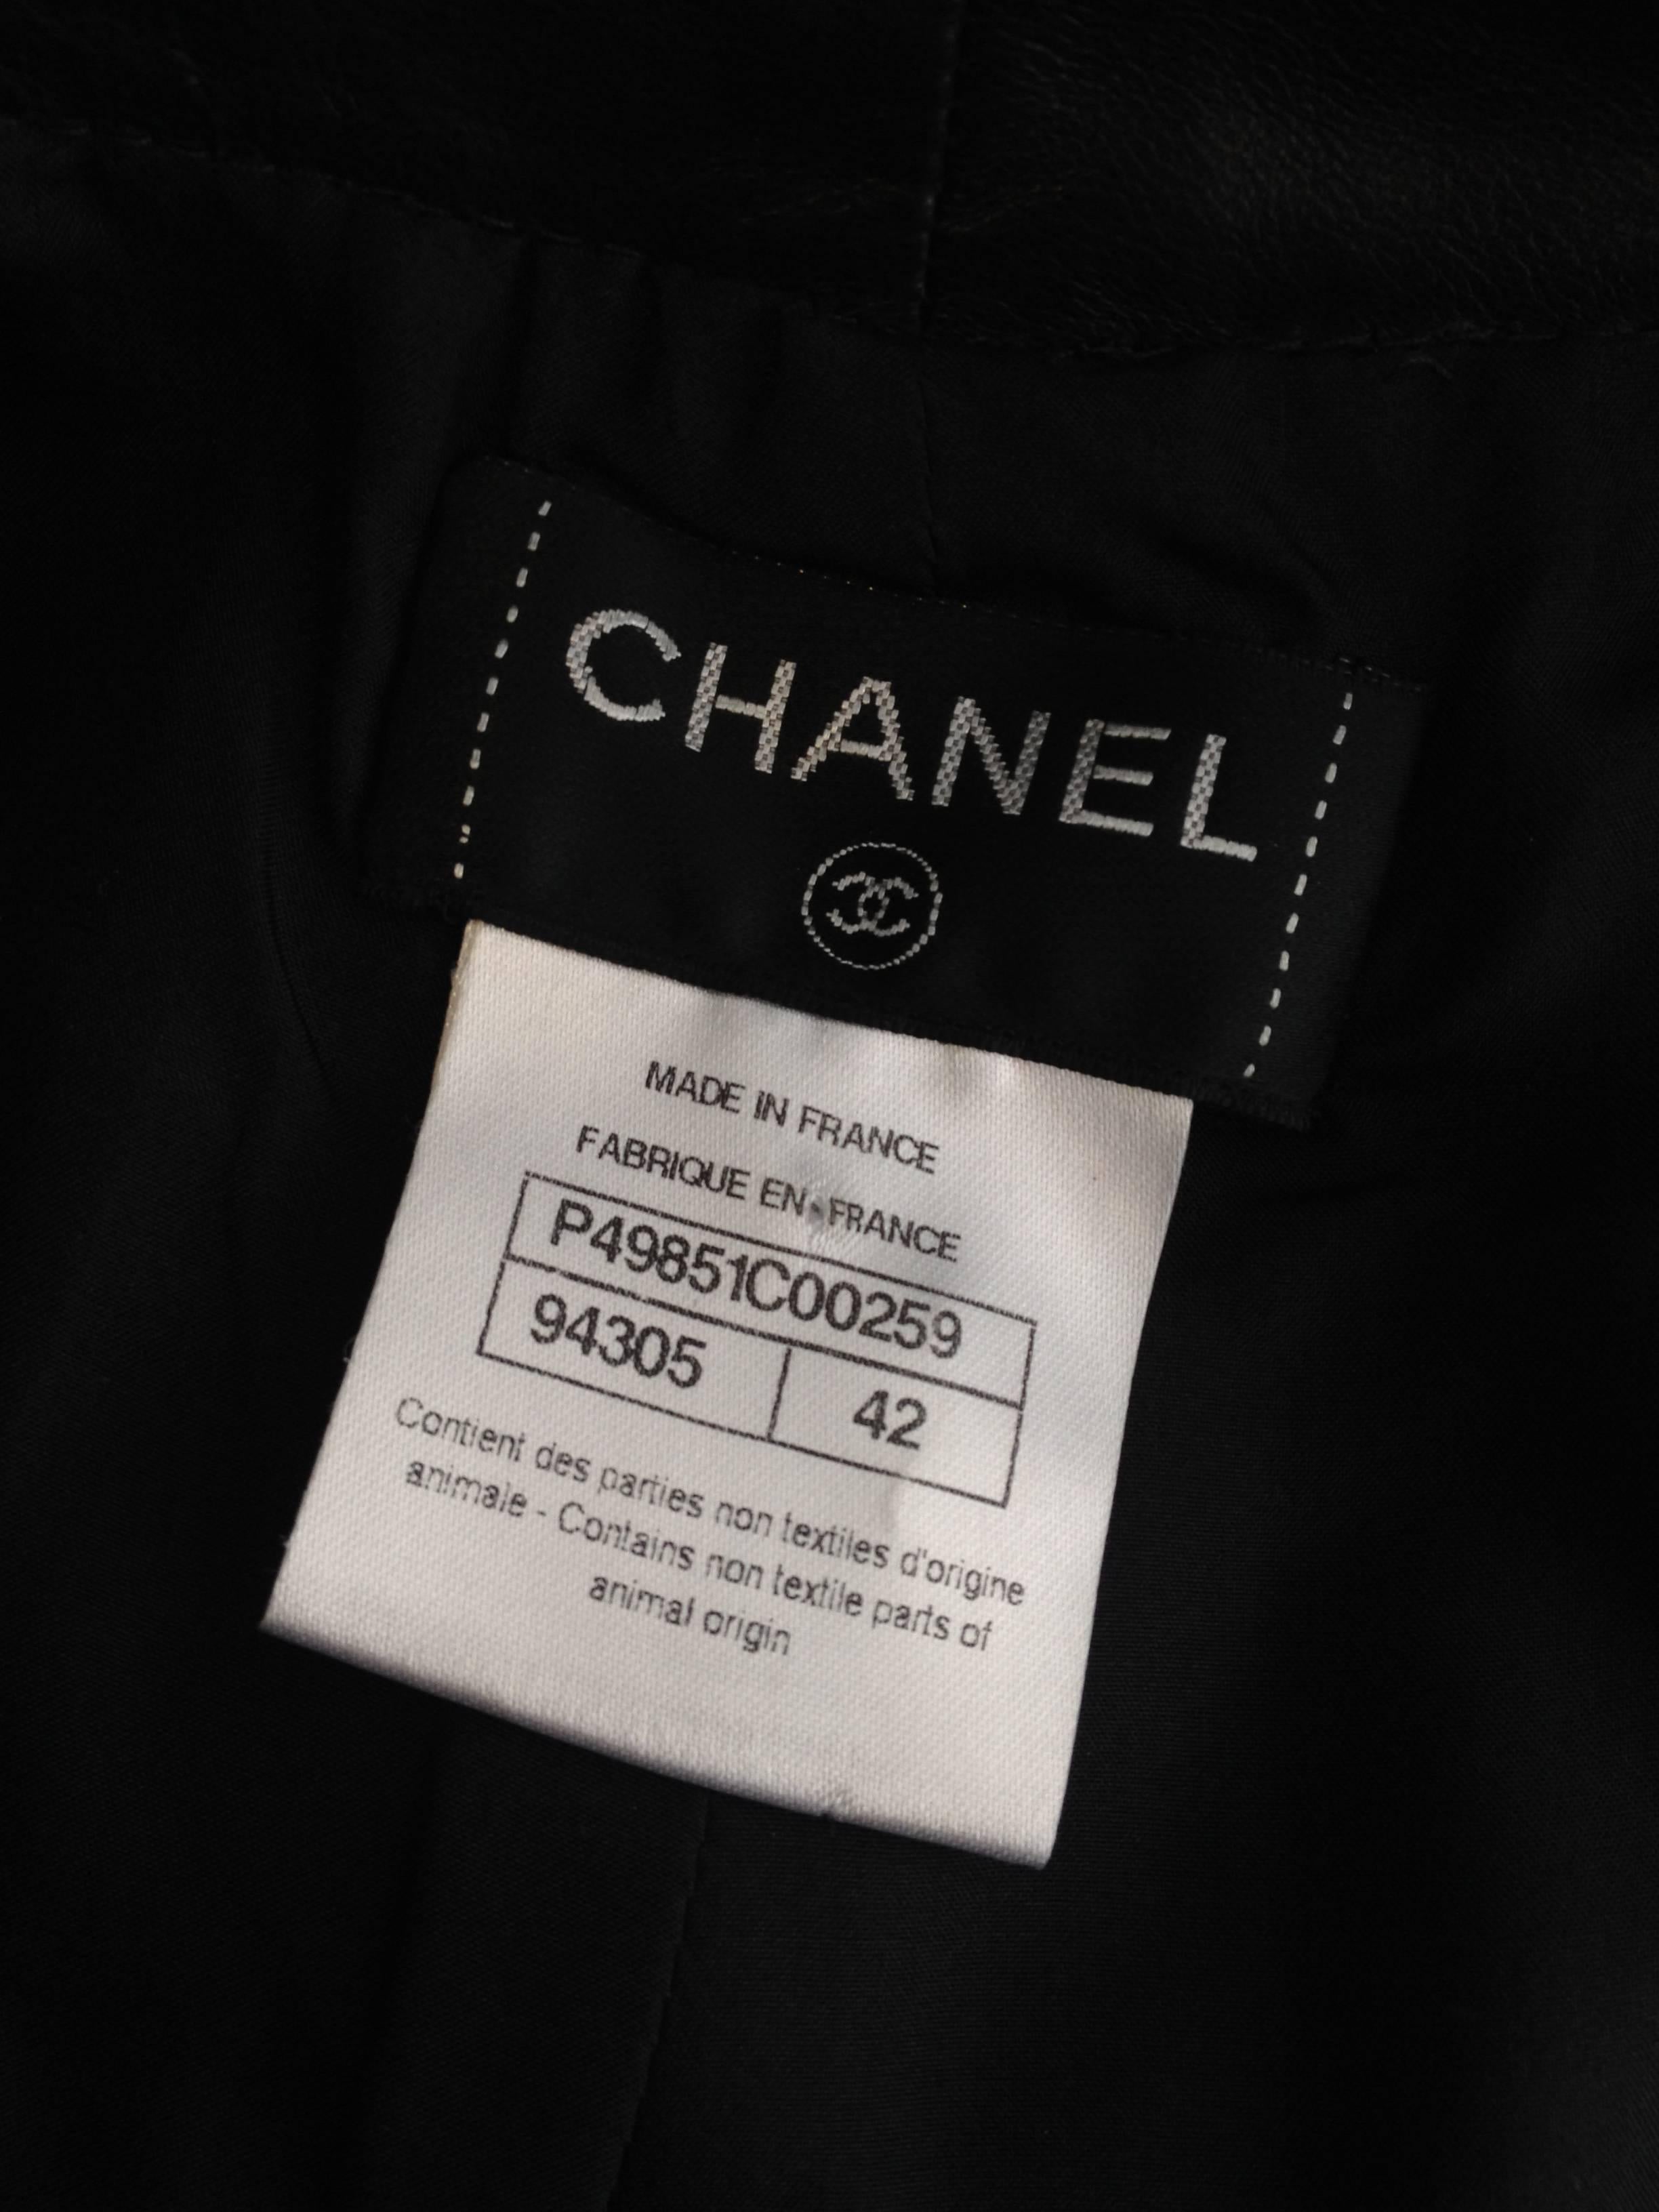 Chanel Black Leather Culottes Size 42 (10) For Sale 5